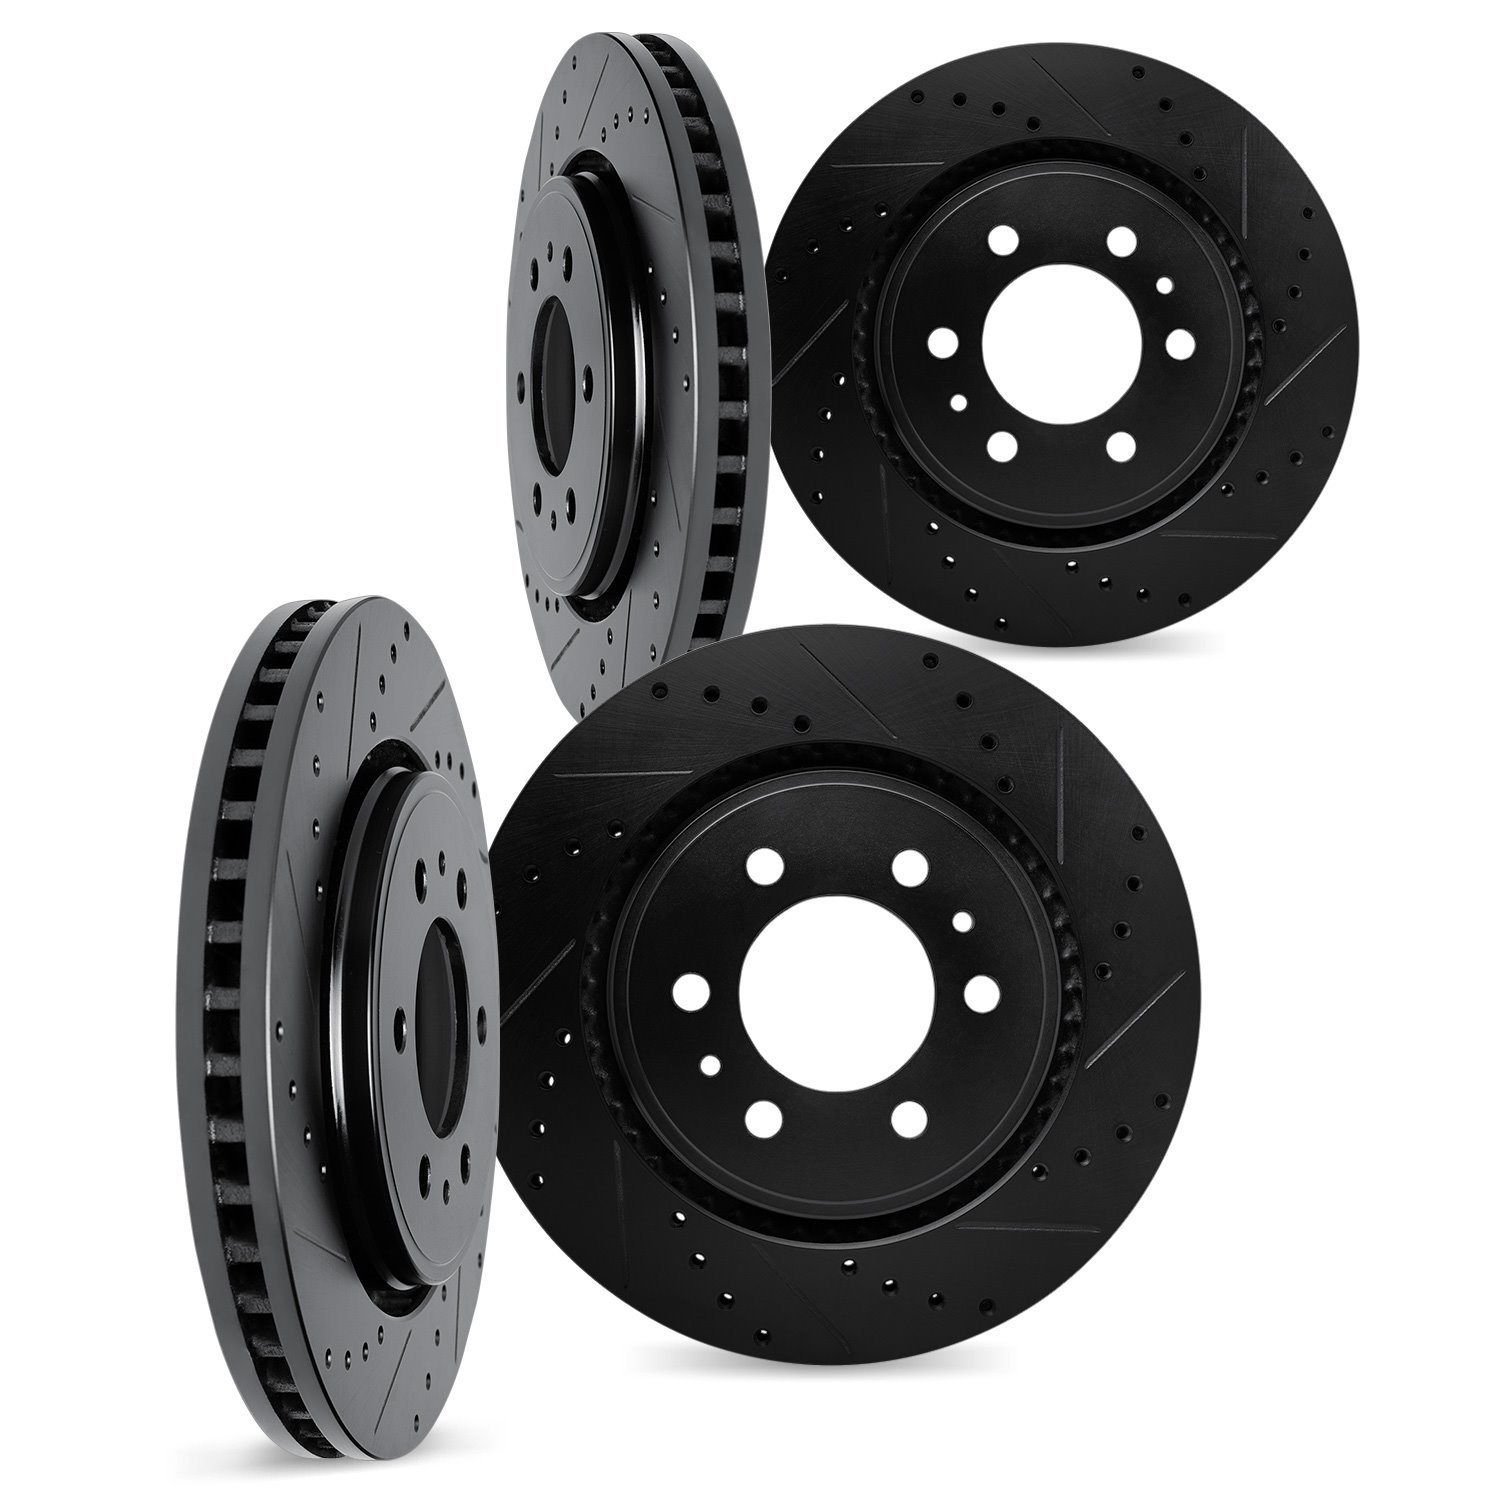 8004-67100 Drilled/Slotted Brake Rotors [Black], 1988-1995 Infiniti/Nissan, Position: Front and Rear